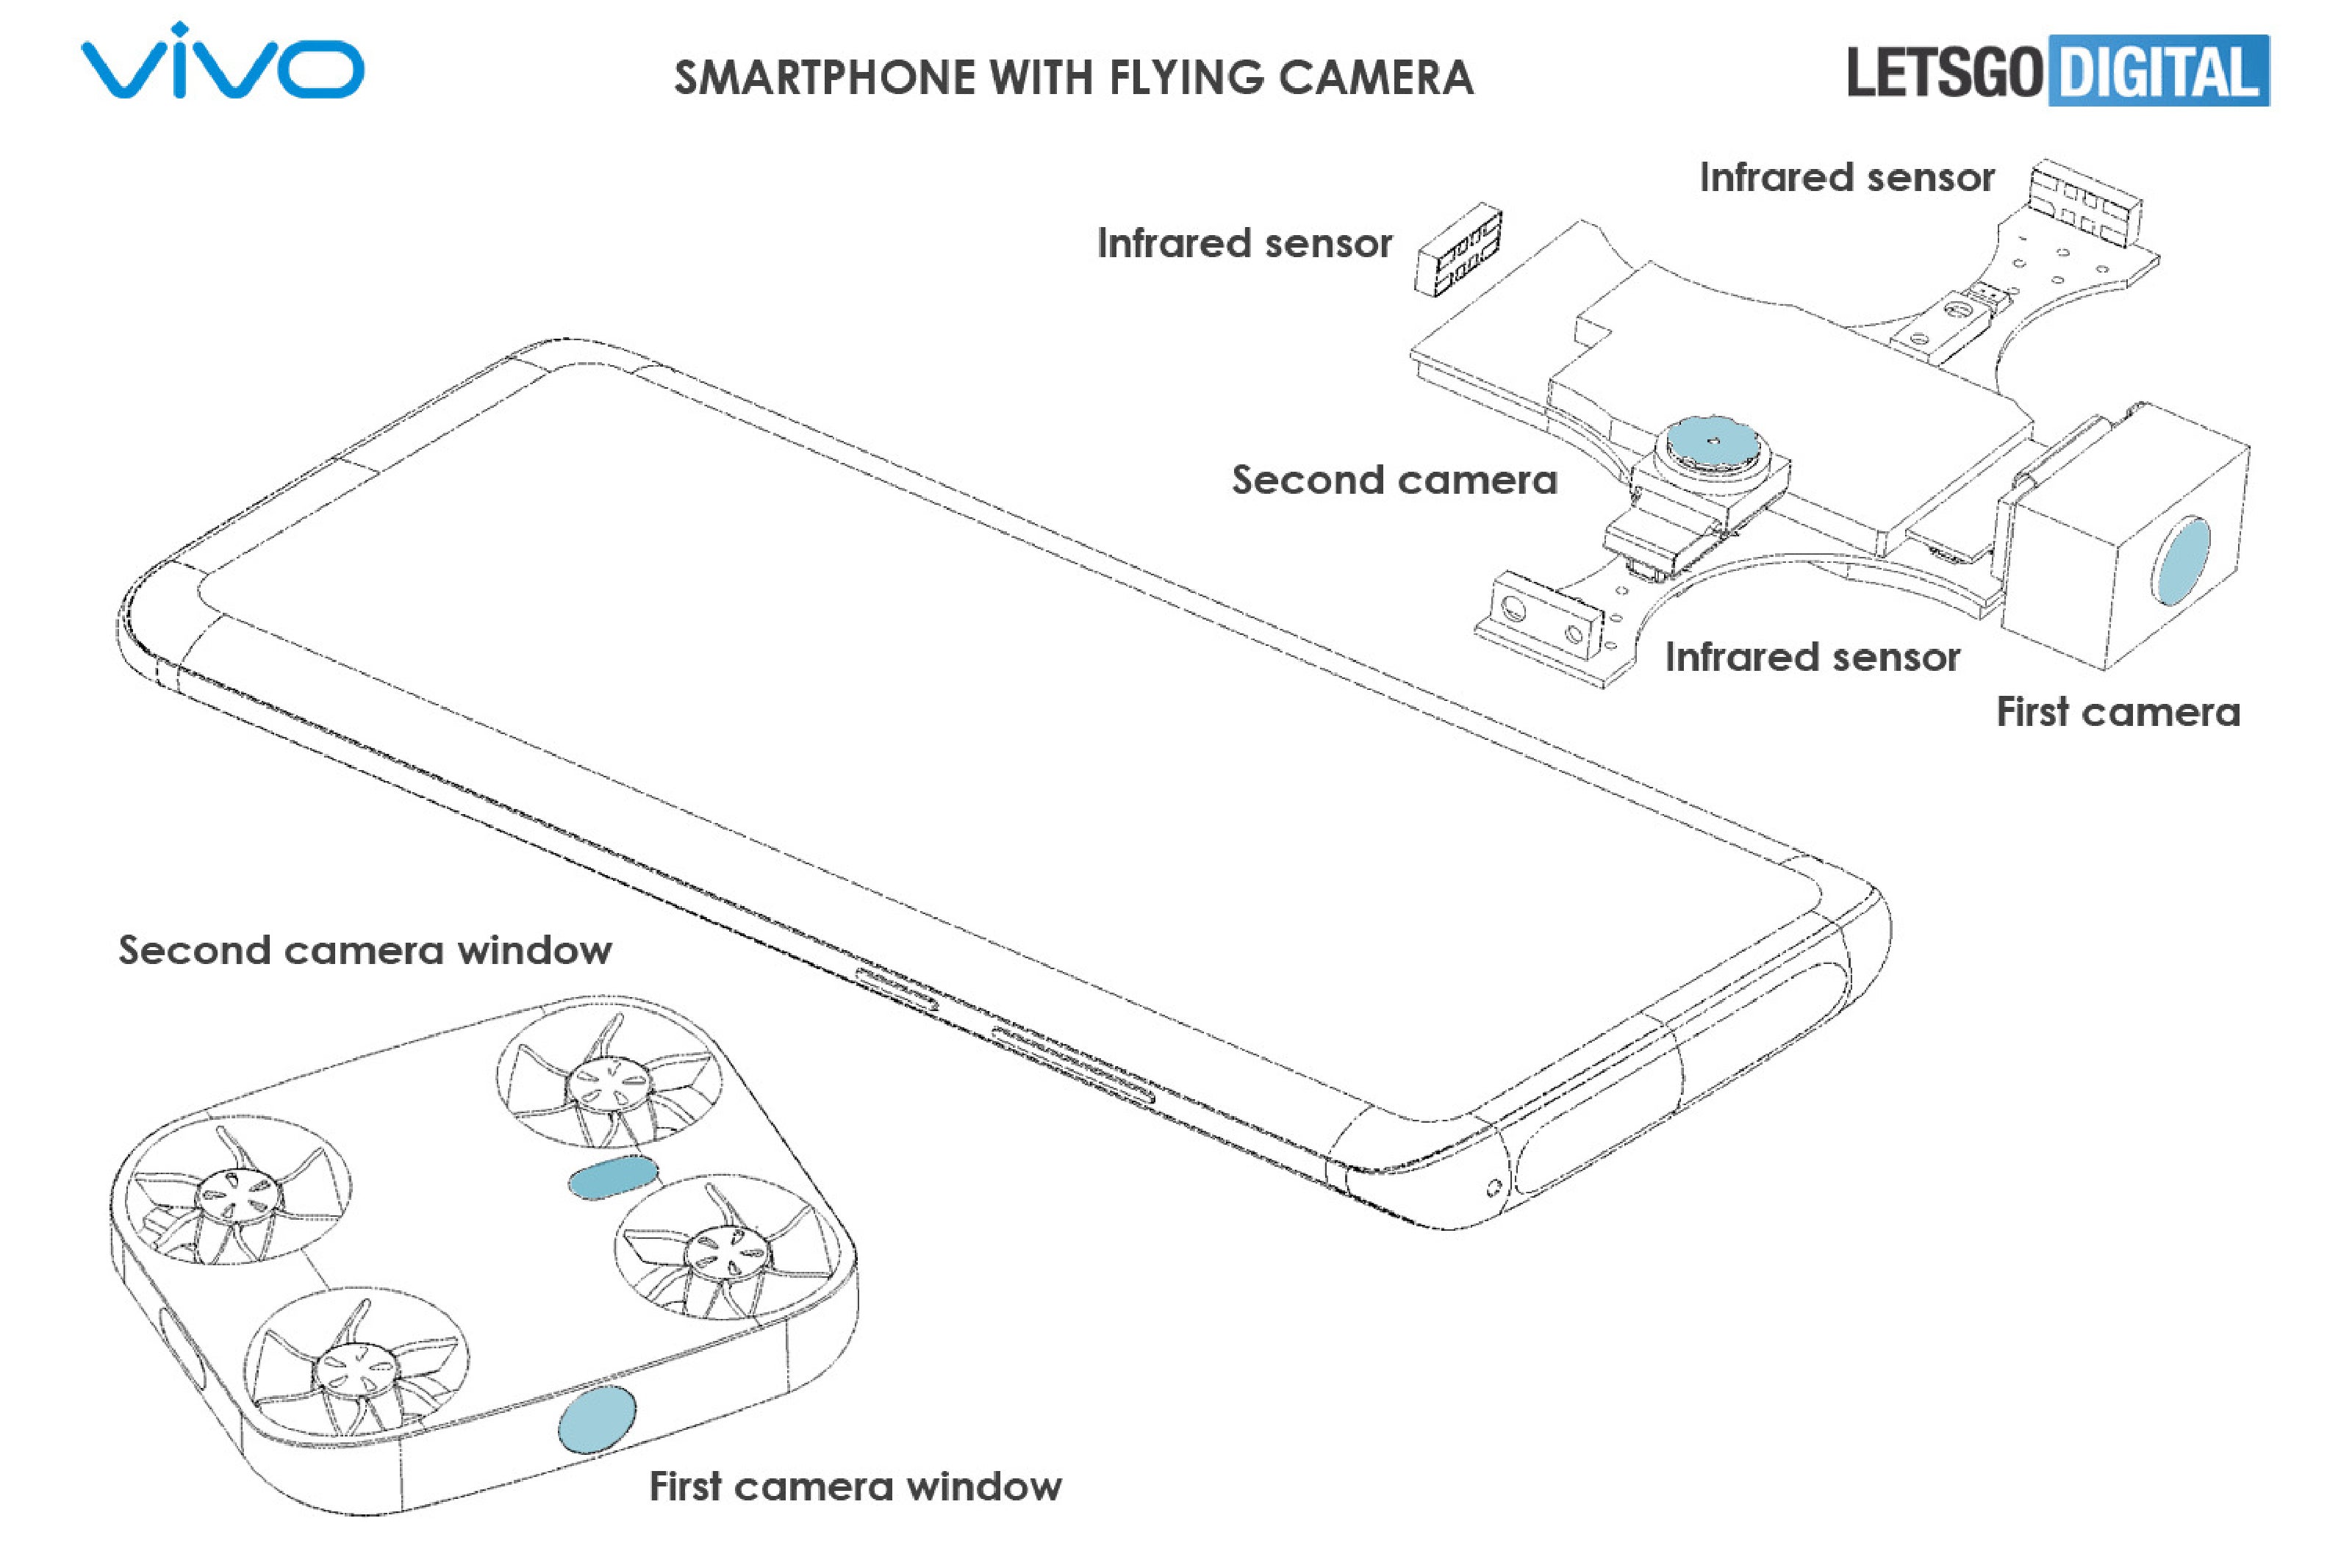 Vivo files patent application for a flying smartphone camera - Vivo files a patent application for a detachable flying smartphone camera